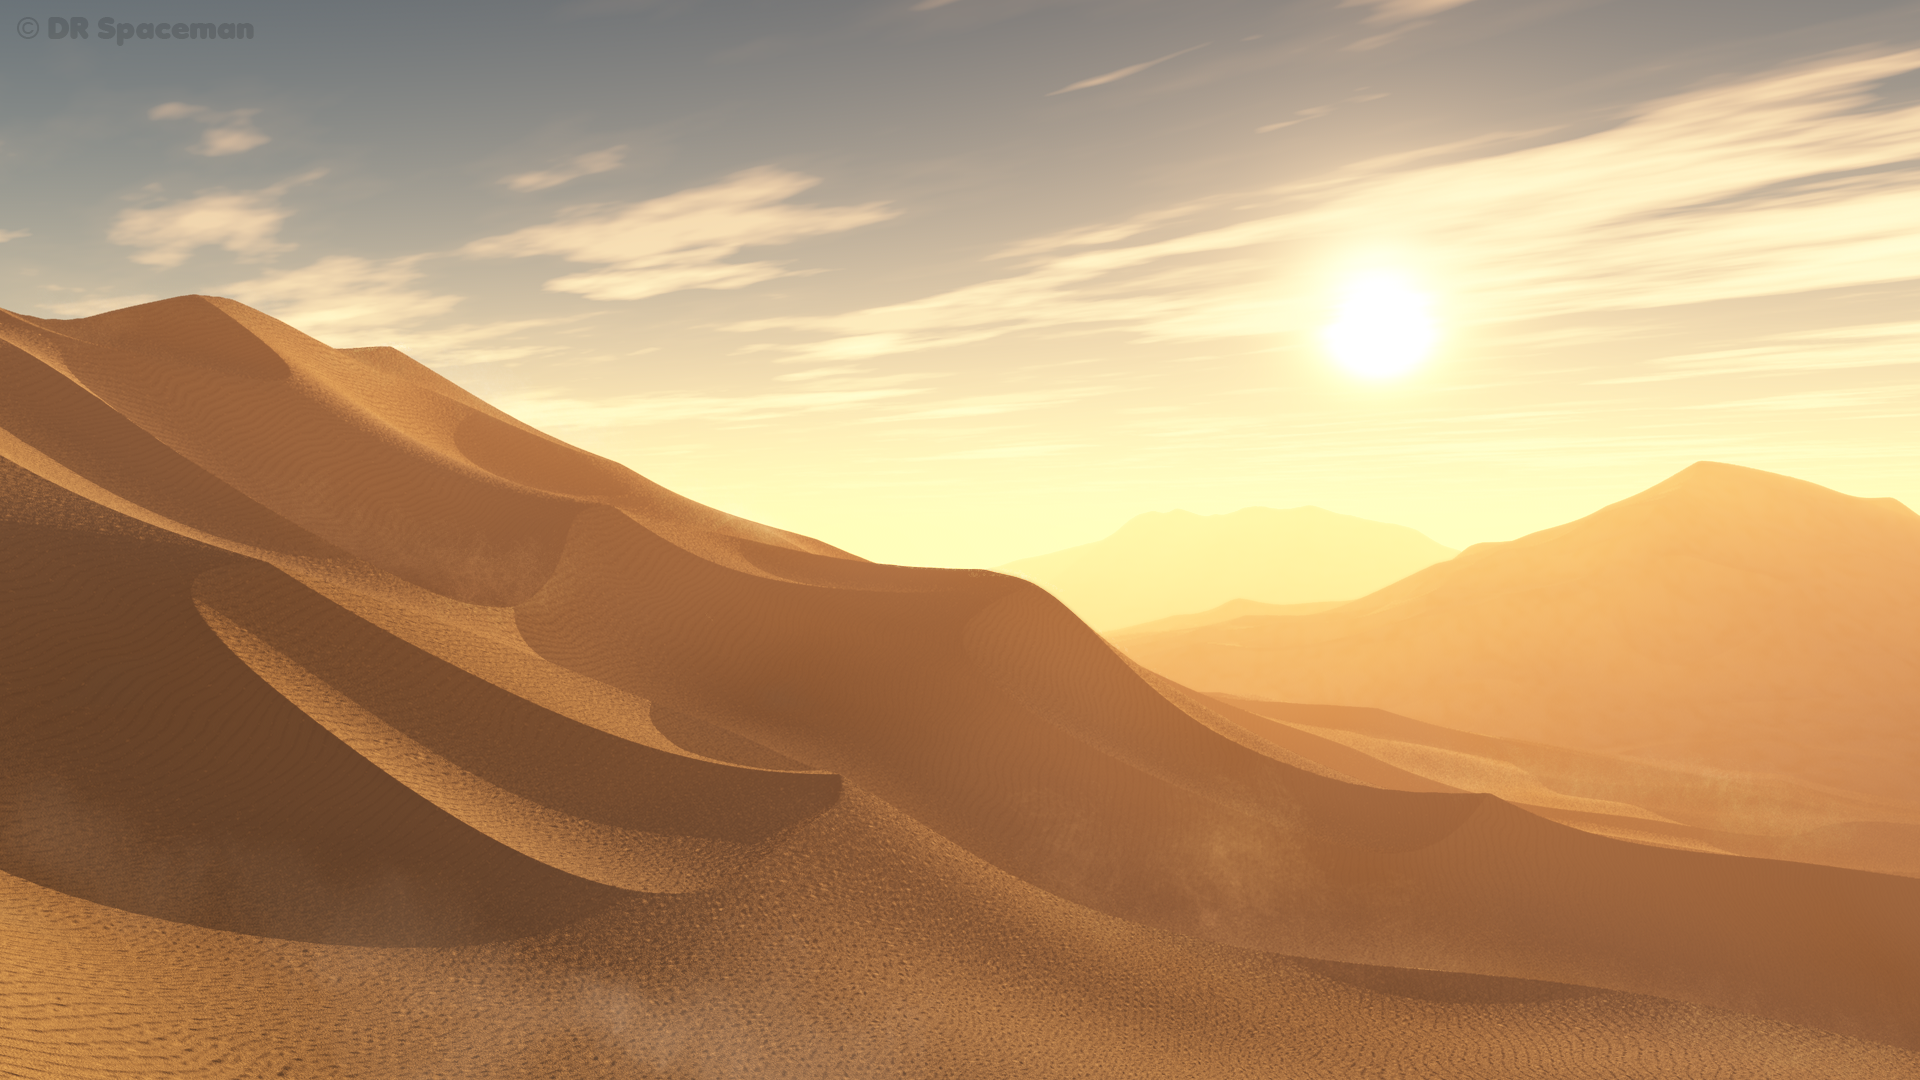 vue_desert_scene_by_drspaceman-d4exne5.png